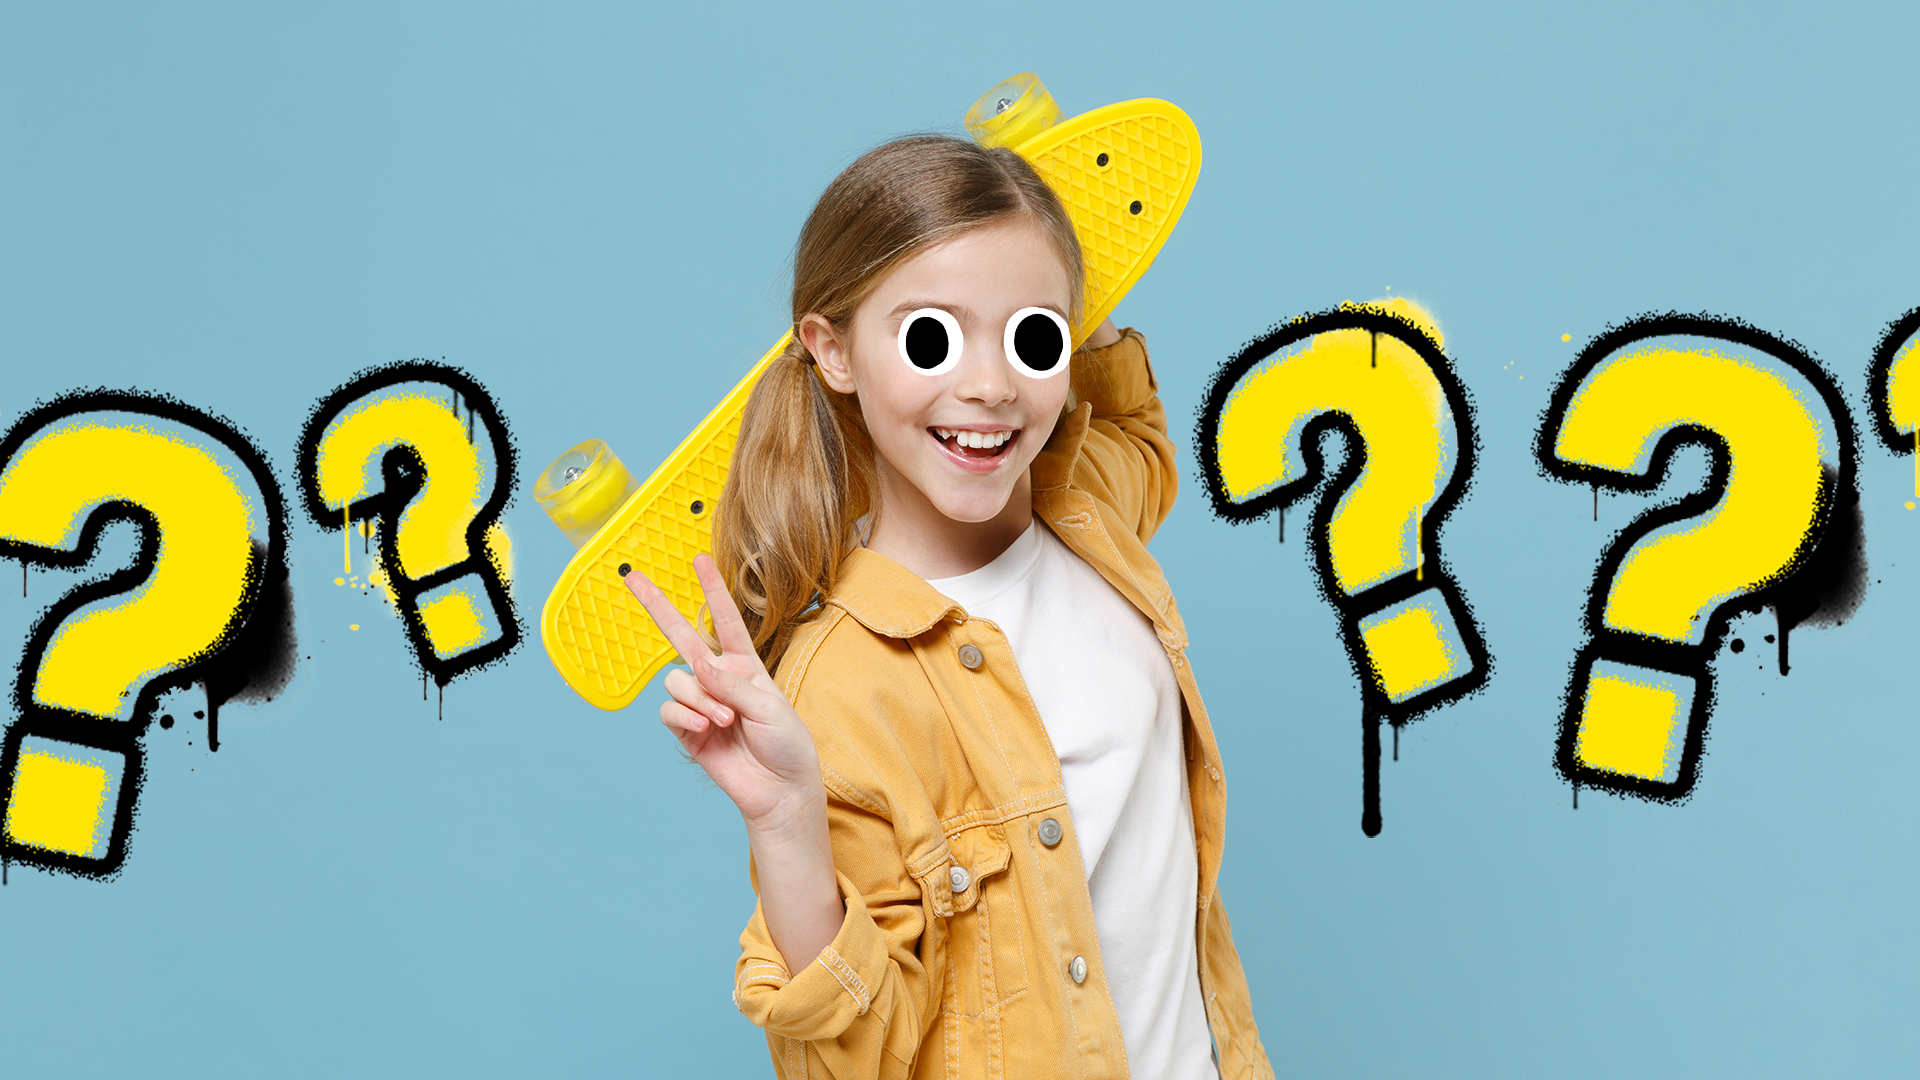 Girl with skateboard on blue background with question marks